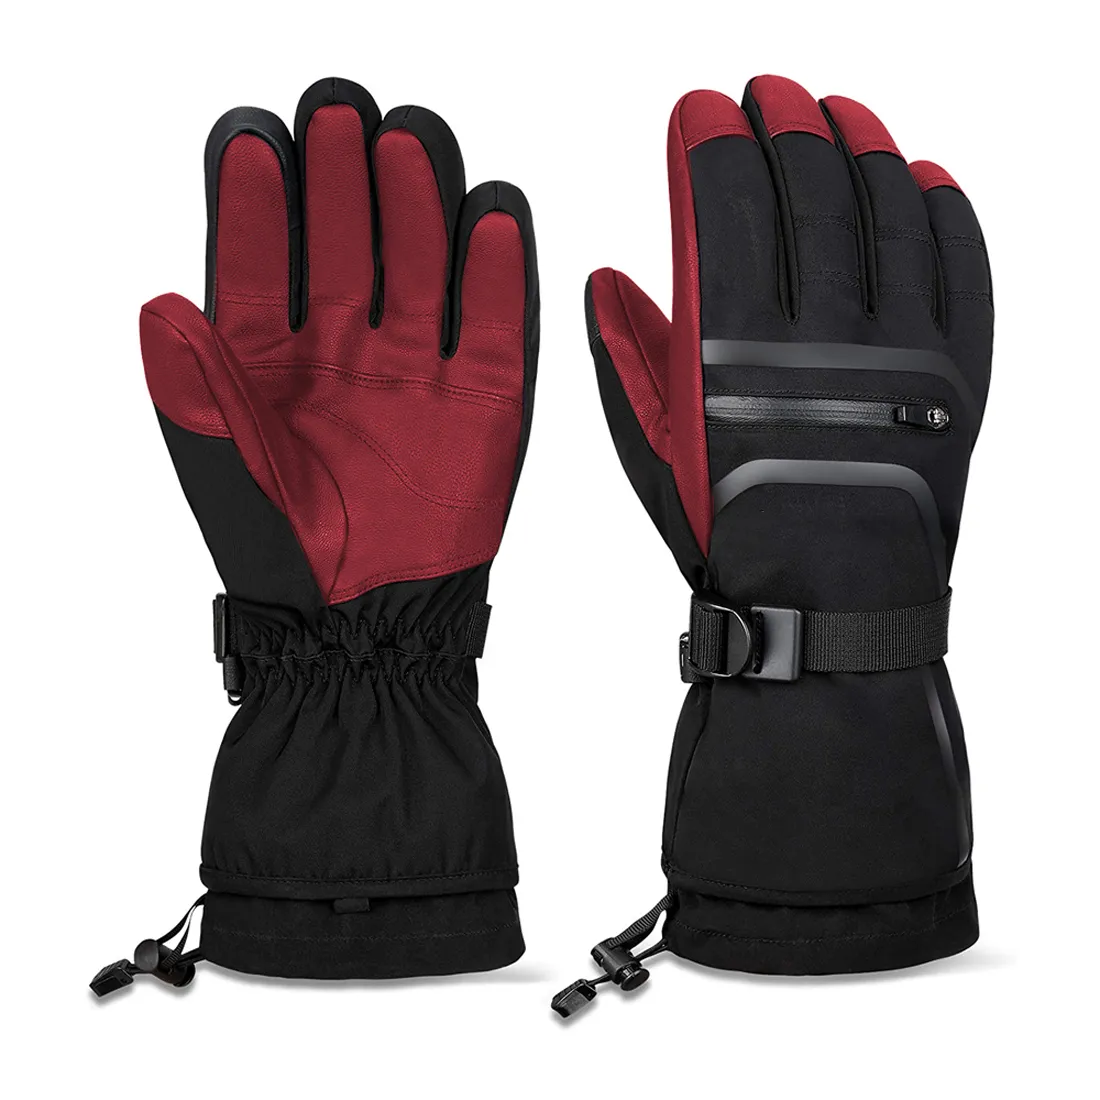 Manufacture Insulated Breathable Glove With Waterproof Wicking Ski Gloves Winter Warm Gloves use for protection oem service